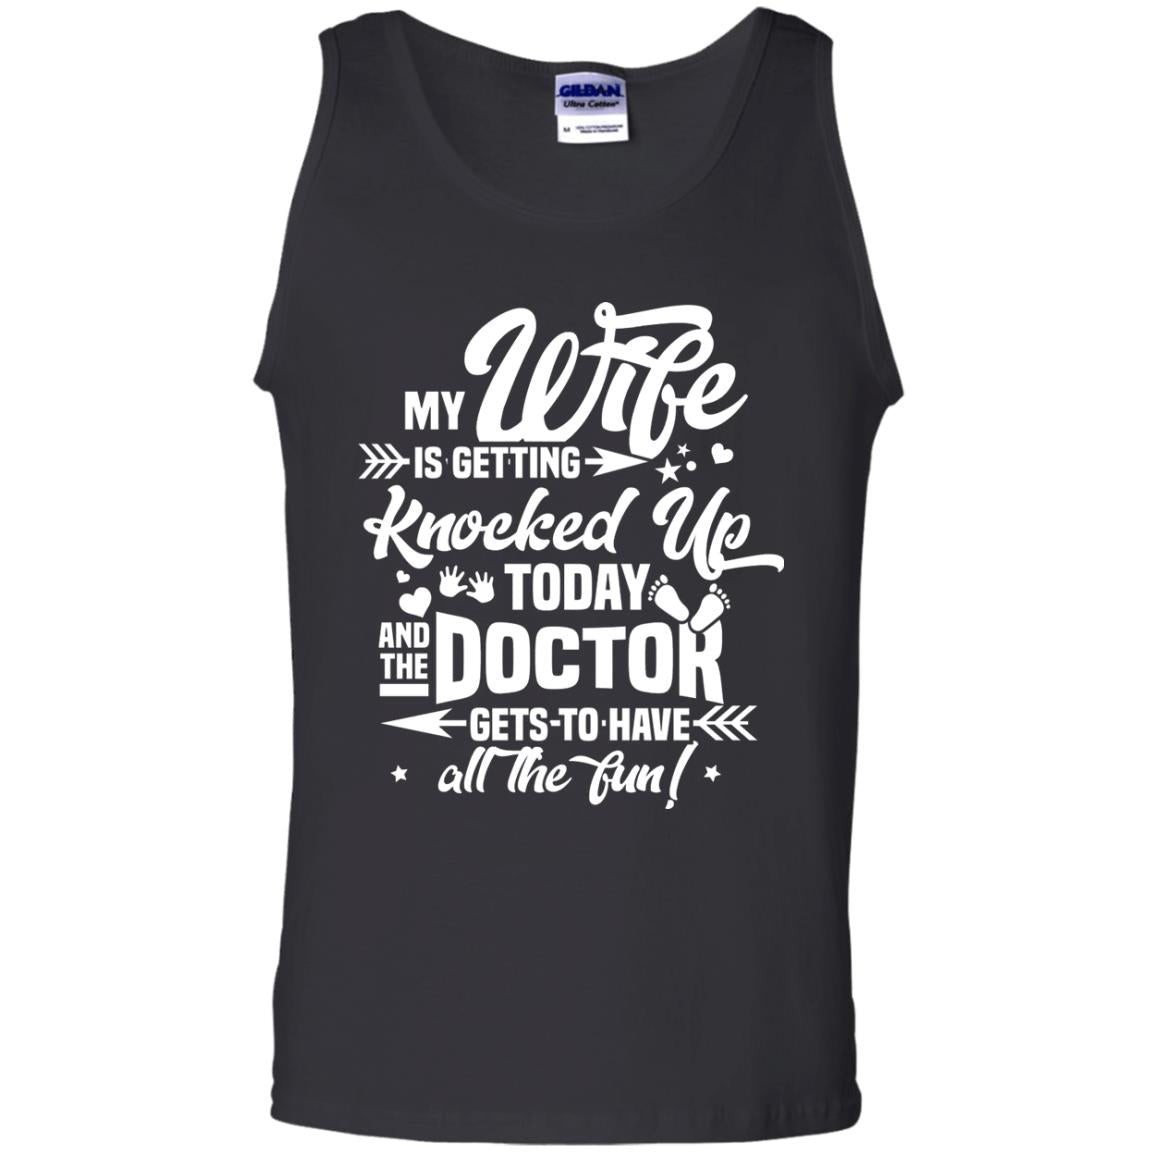 My Wife Is Getting Knocked Up Today And The Doctor Gets To Have All The Fun Pregnancy Announcement ShirtG220 Gildan 100% Cotton Tank Top